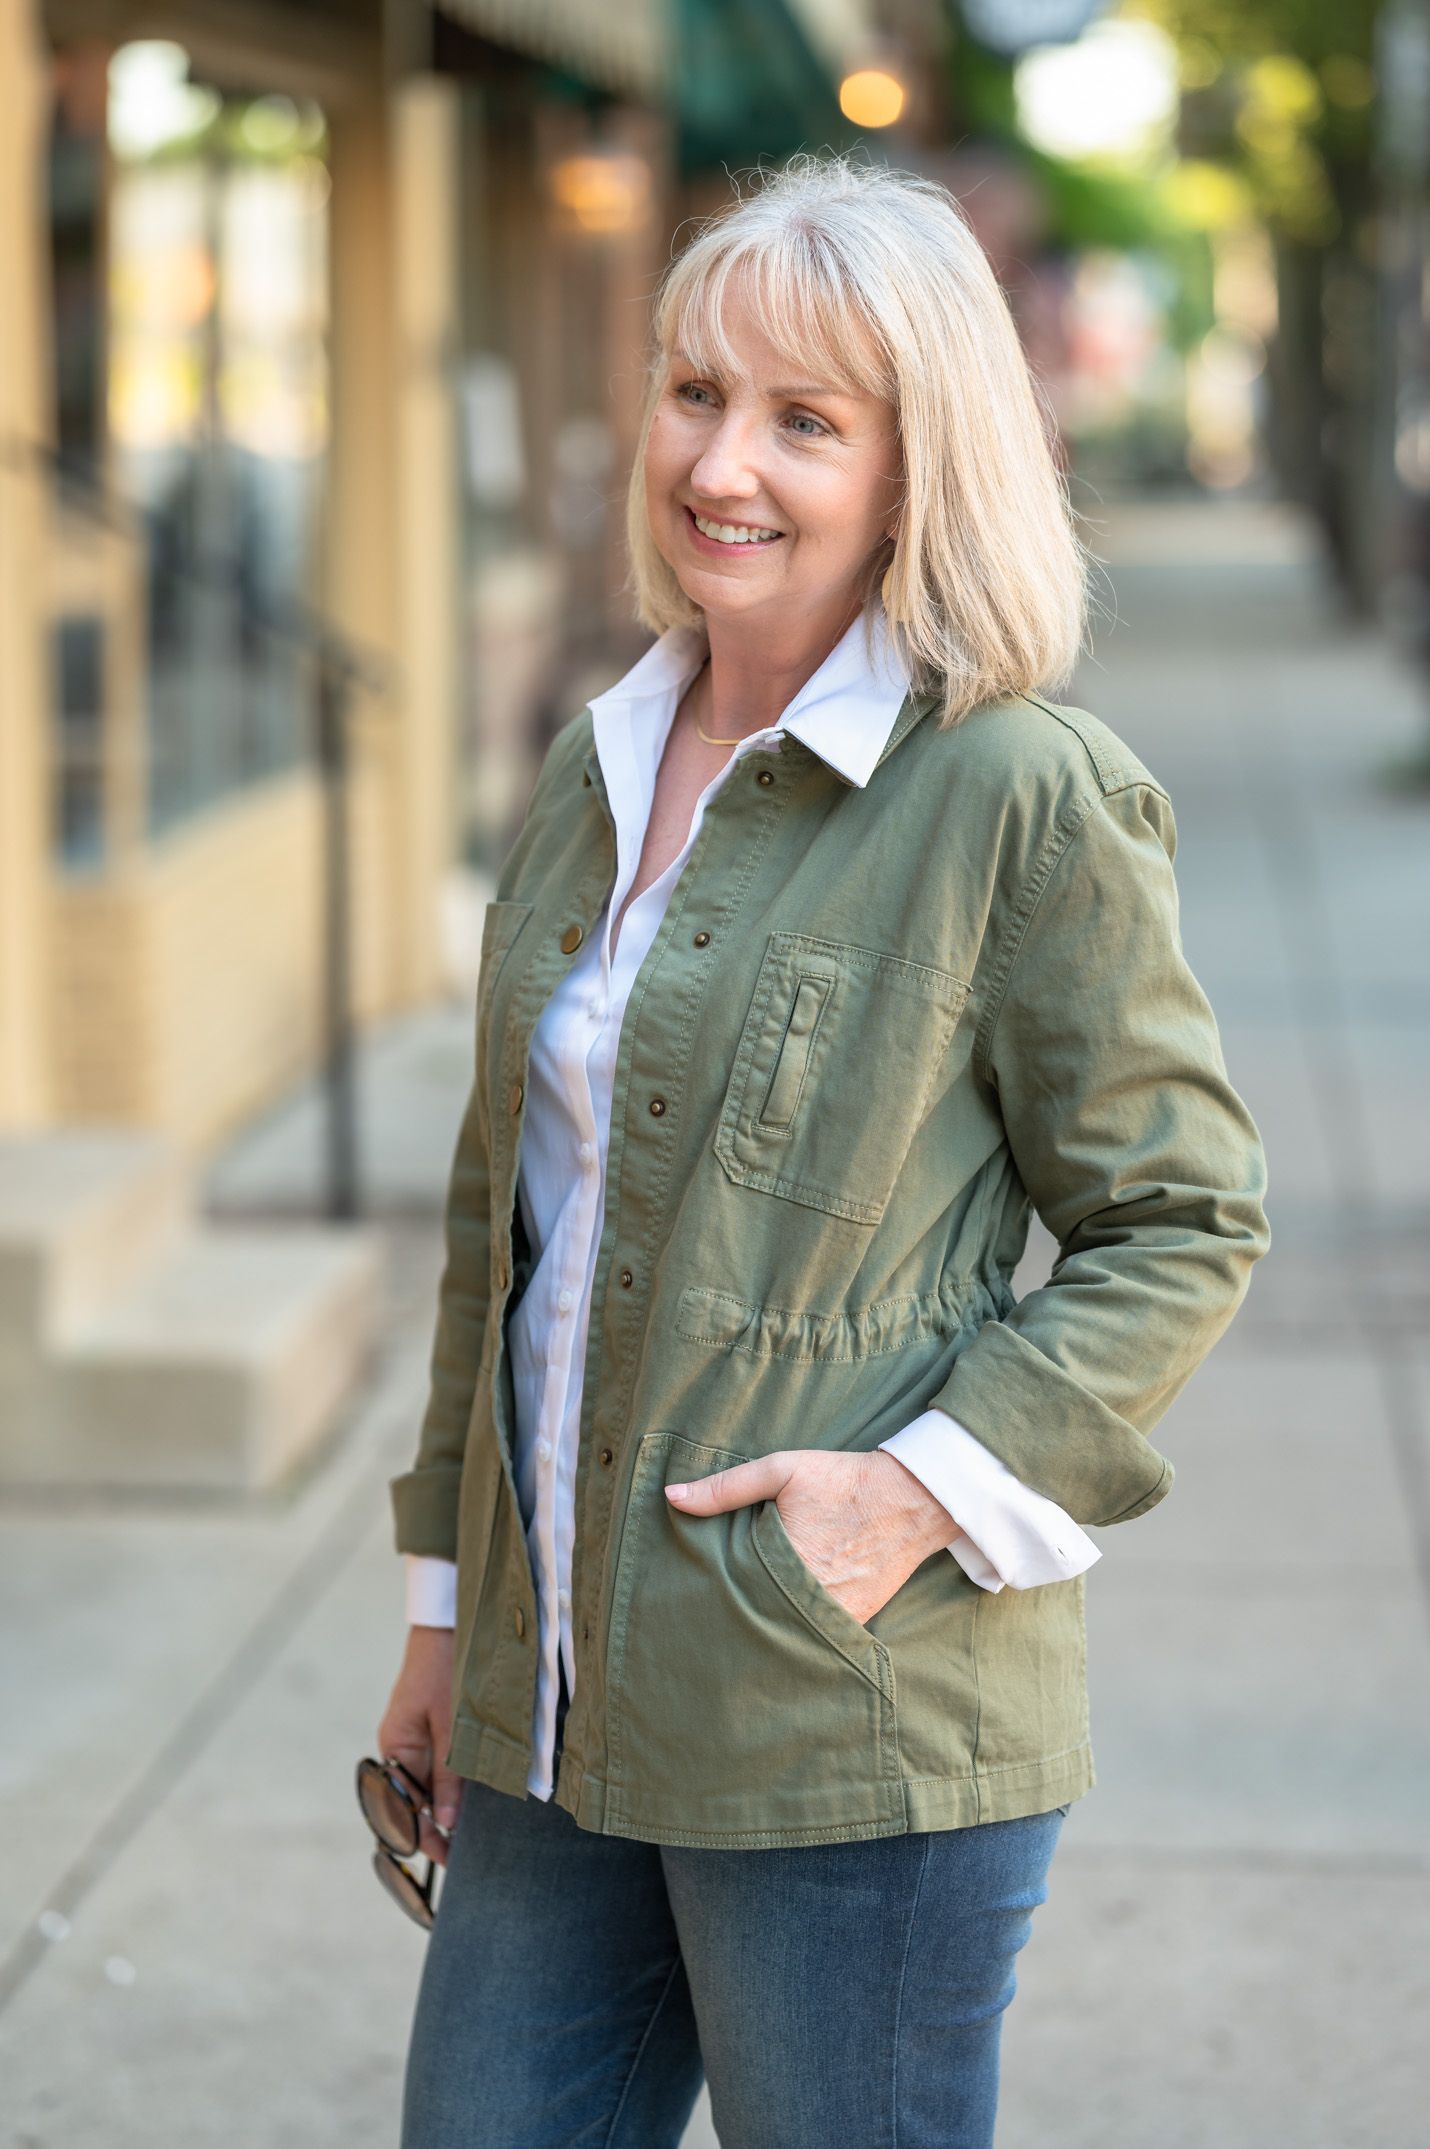 Caslon Utility Jacket from the Nordstrom Anniversary Sale